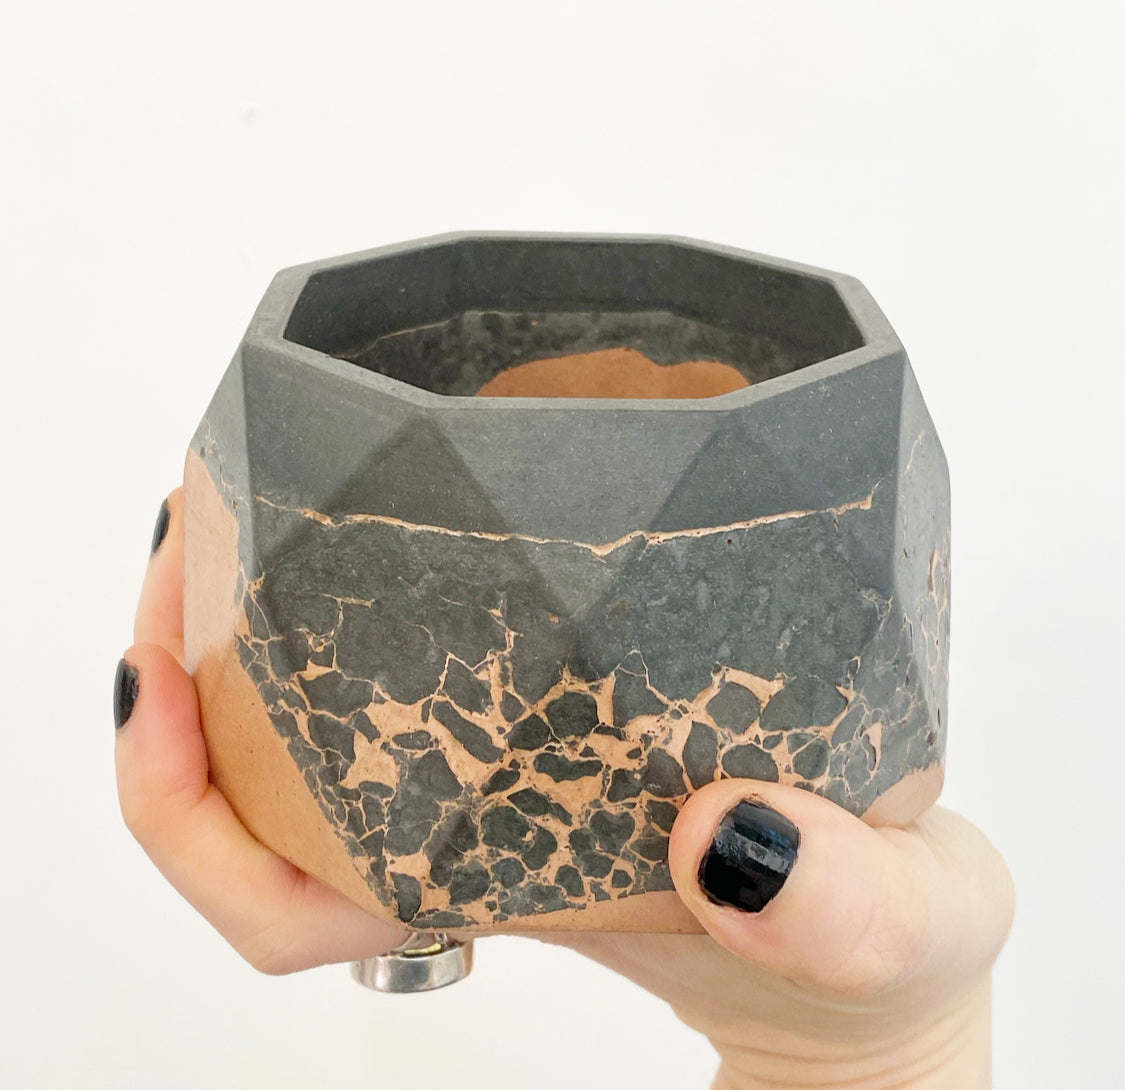 Geode Planter by Brume